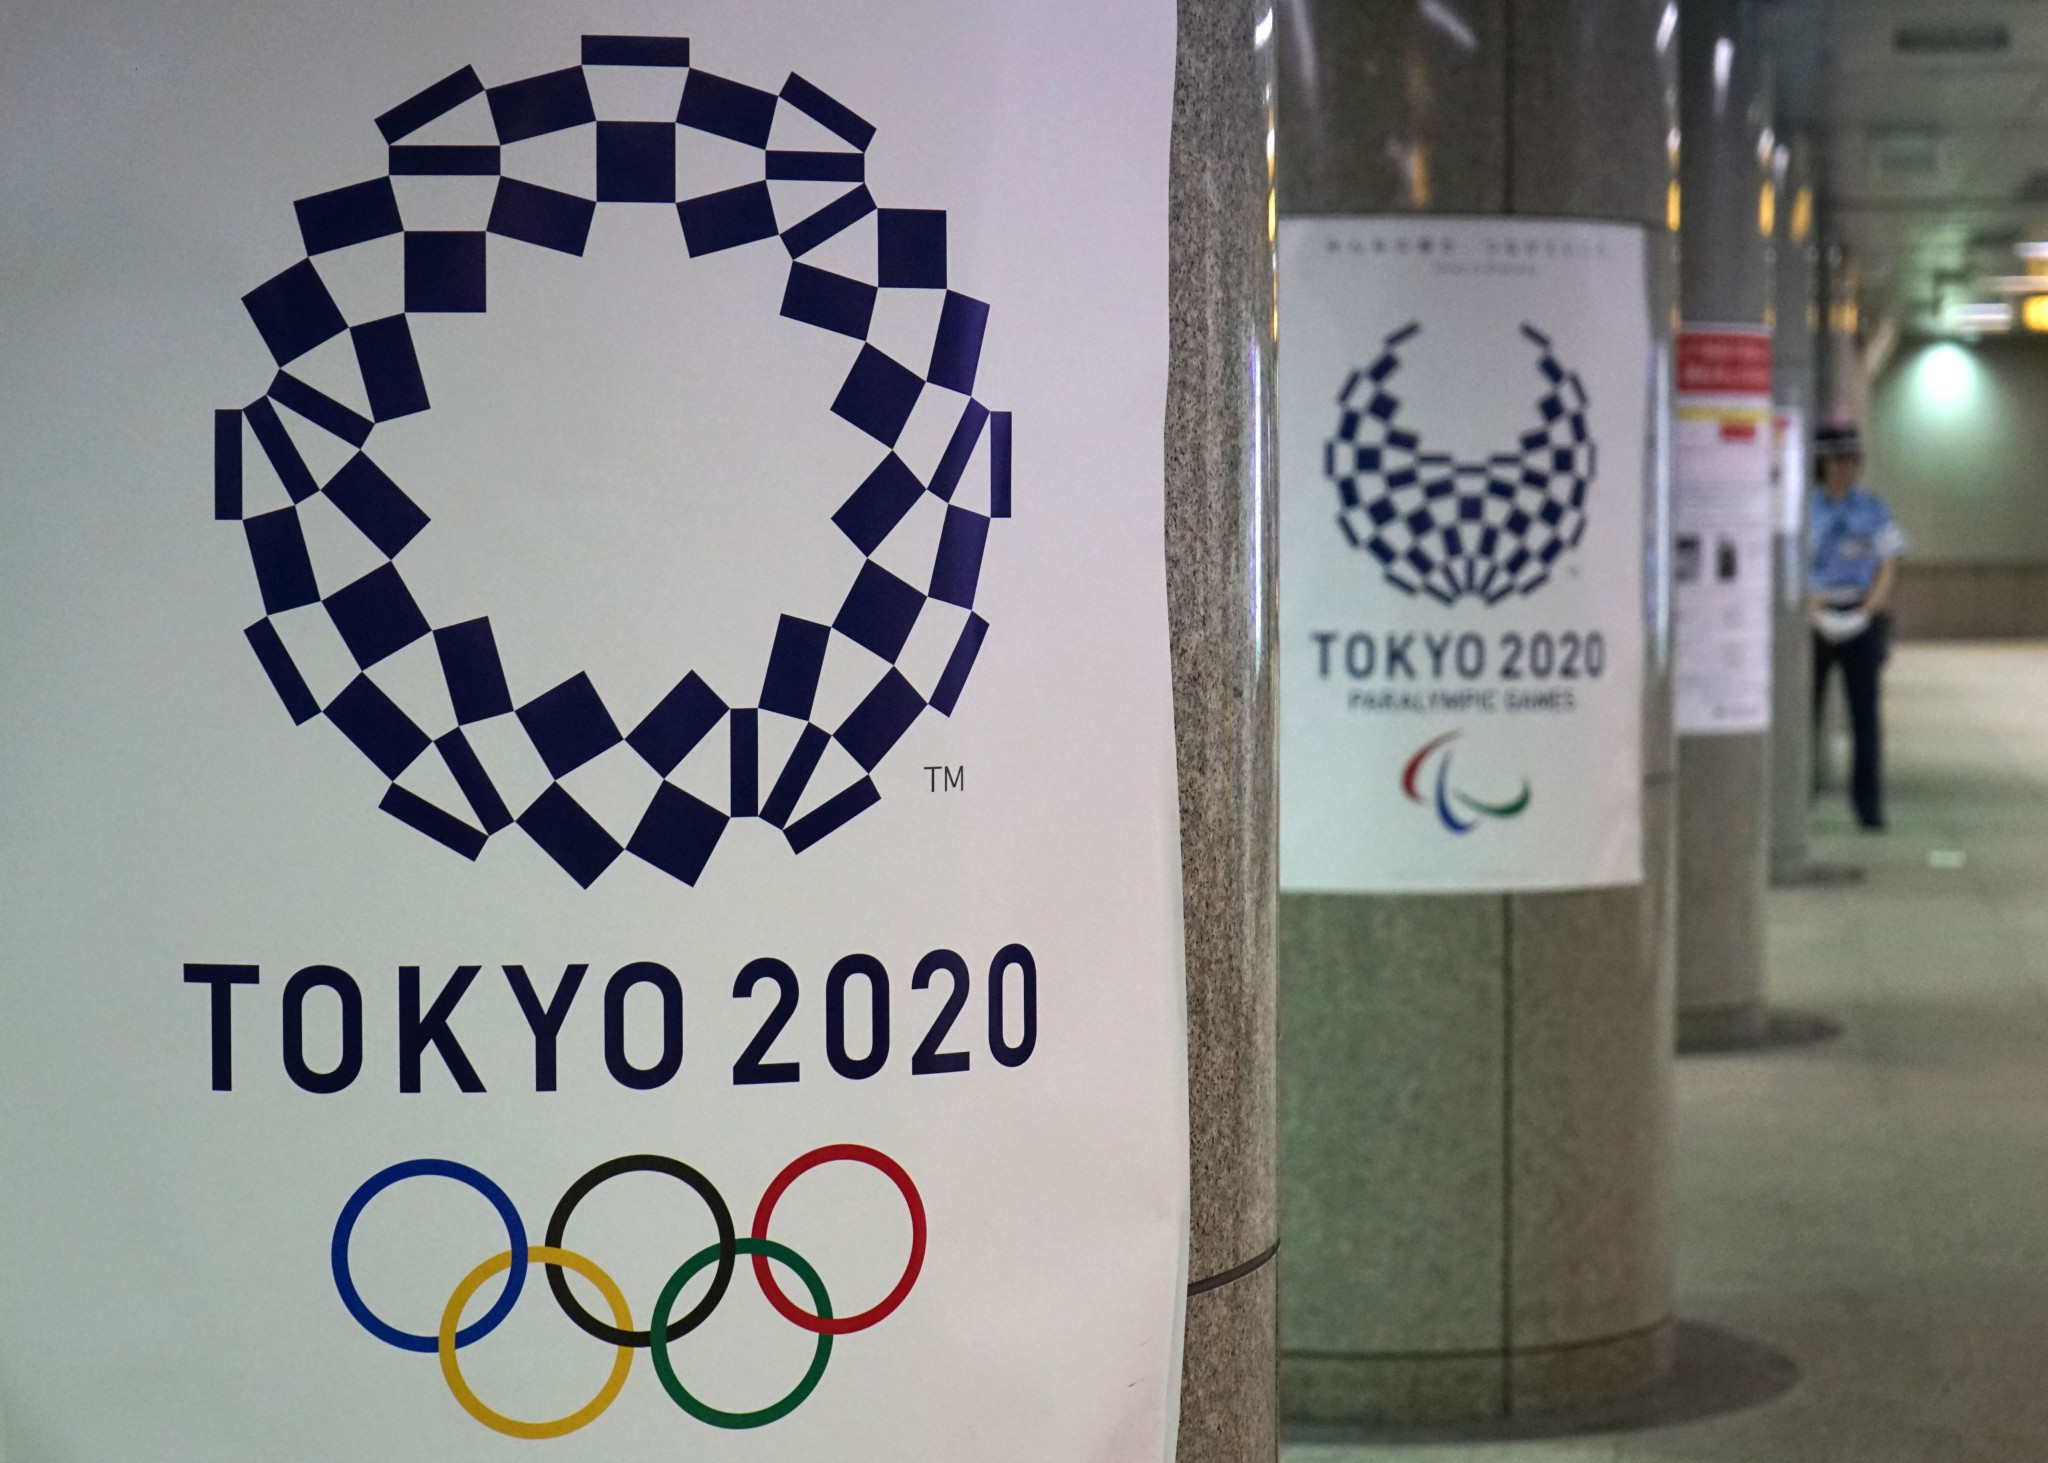 The addition of Google Japan G.K. brings the total number of Tokyo 2020 domestic partners to 64 ©Getty Images